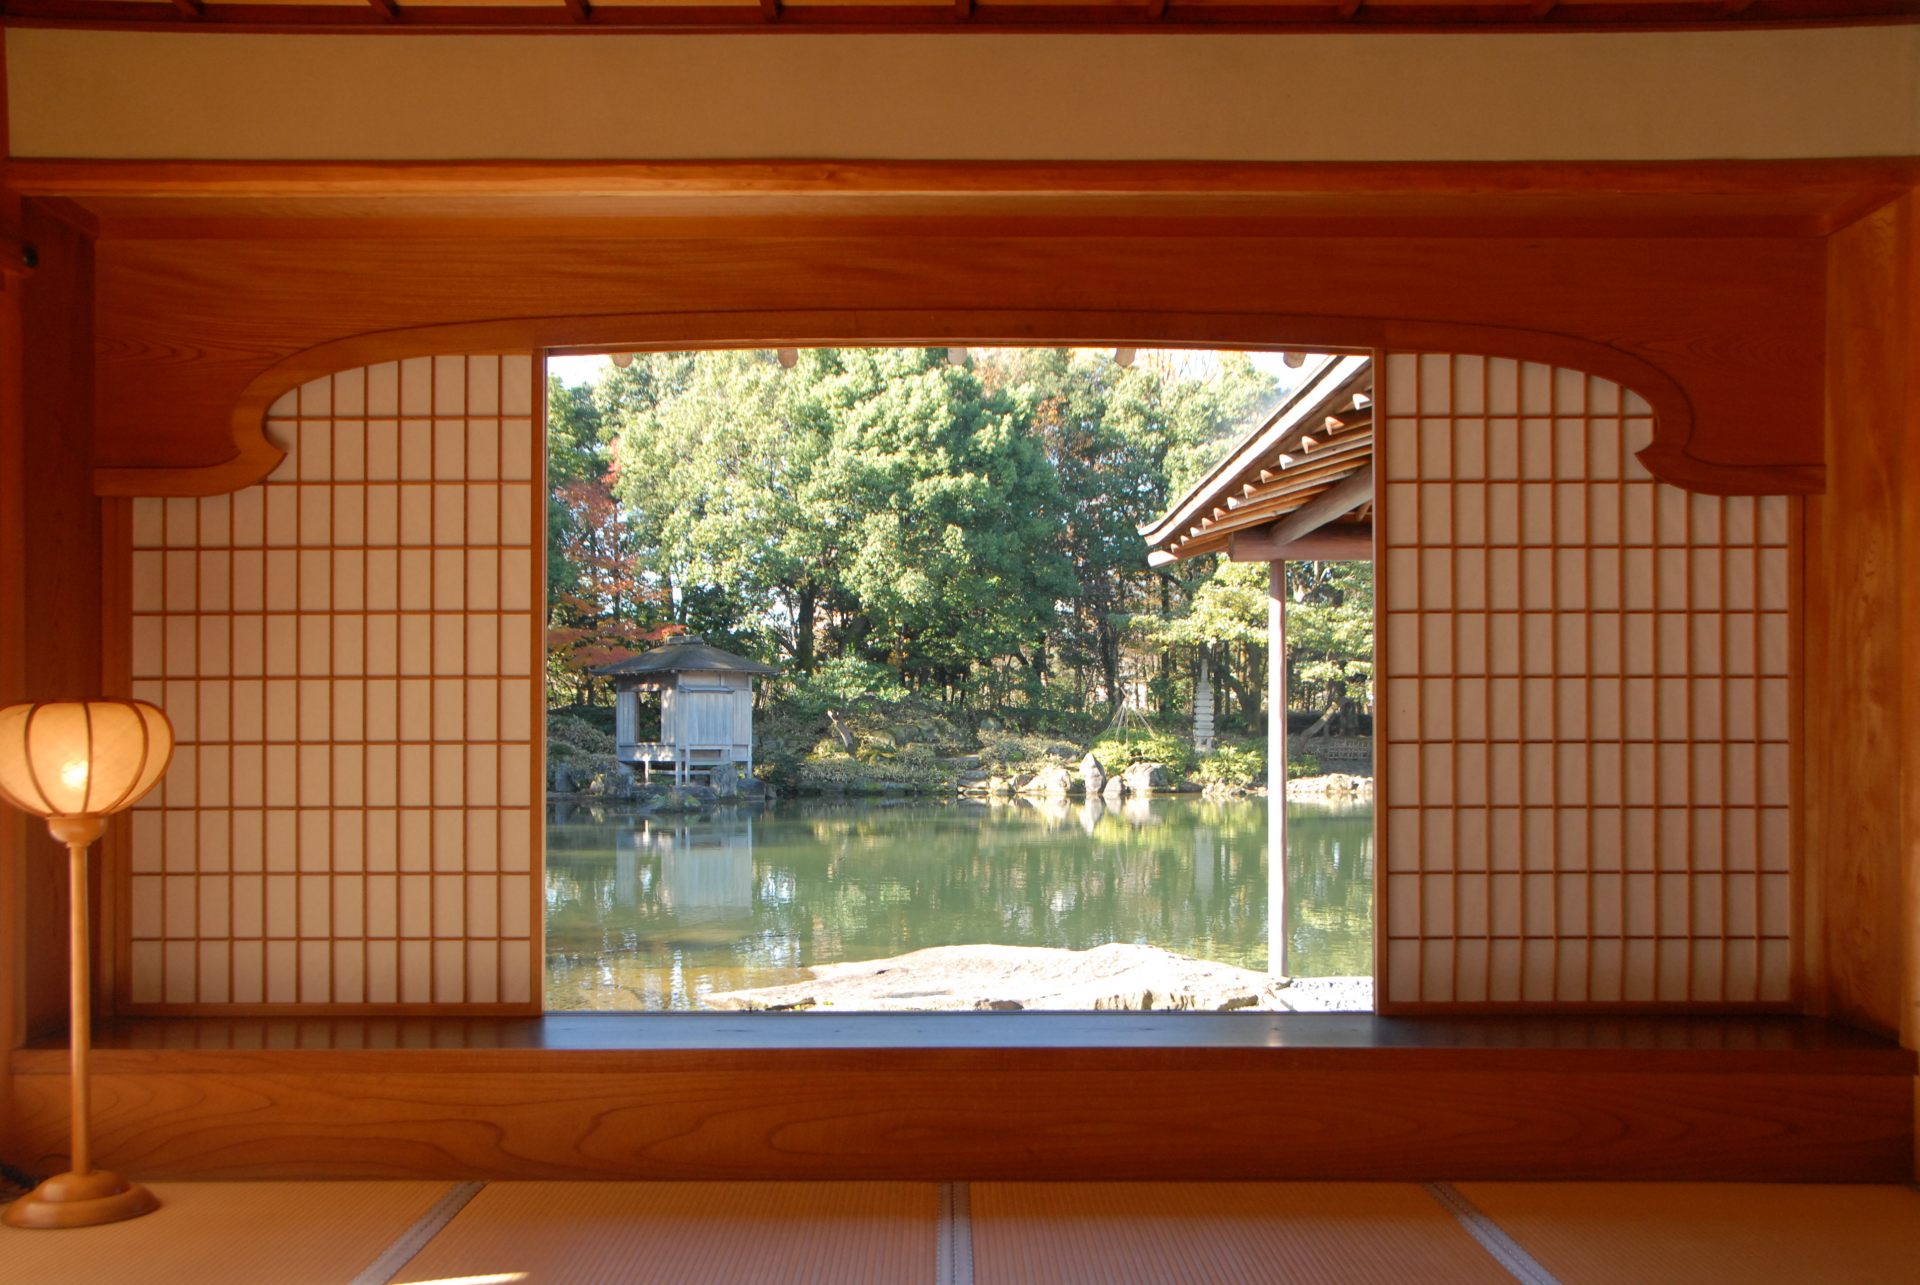 The garden view from inside the Comb-Shaped Room (Kushigata-no-Ma)